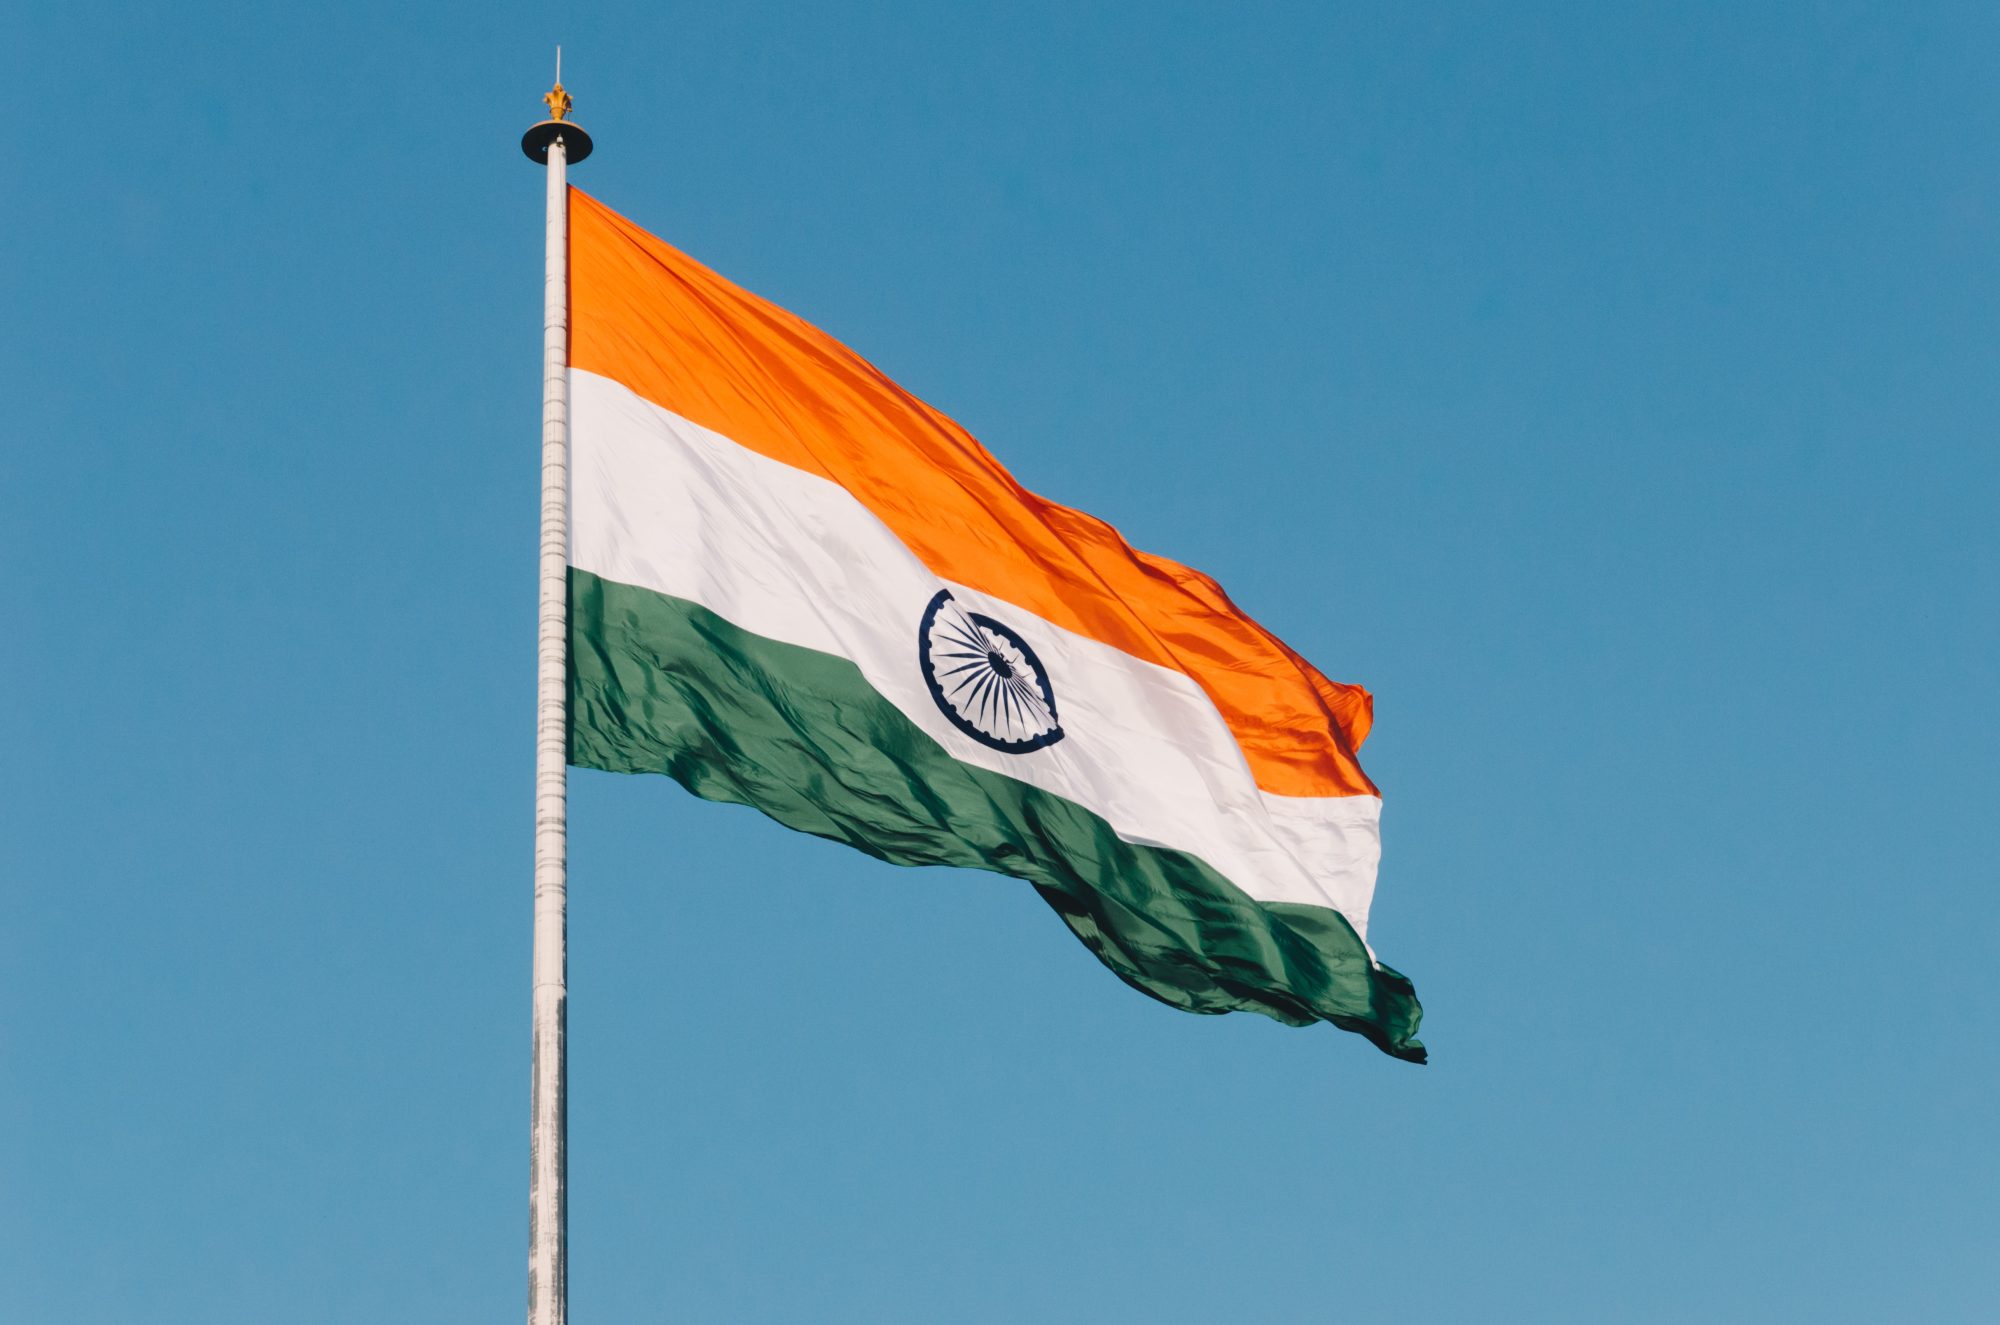 The image contains the Indian flag